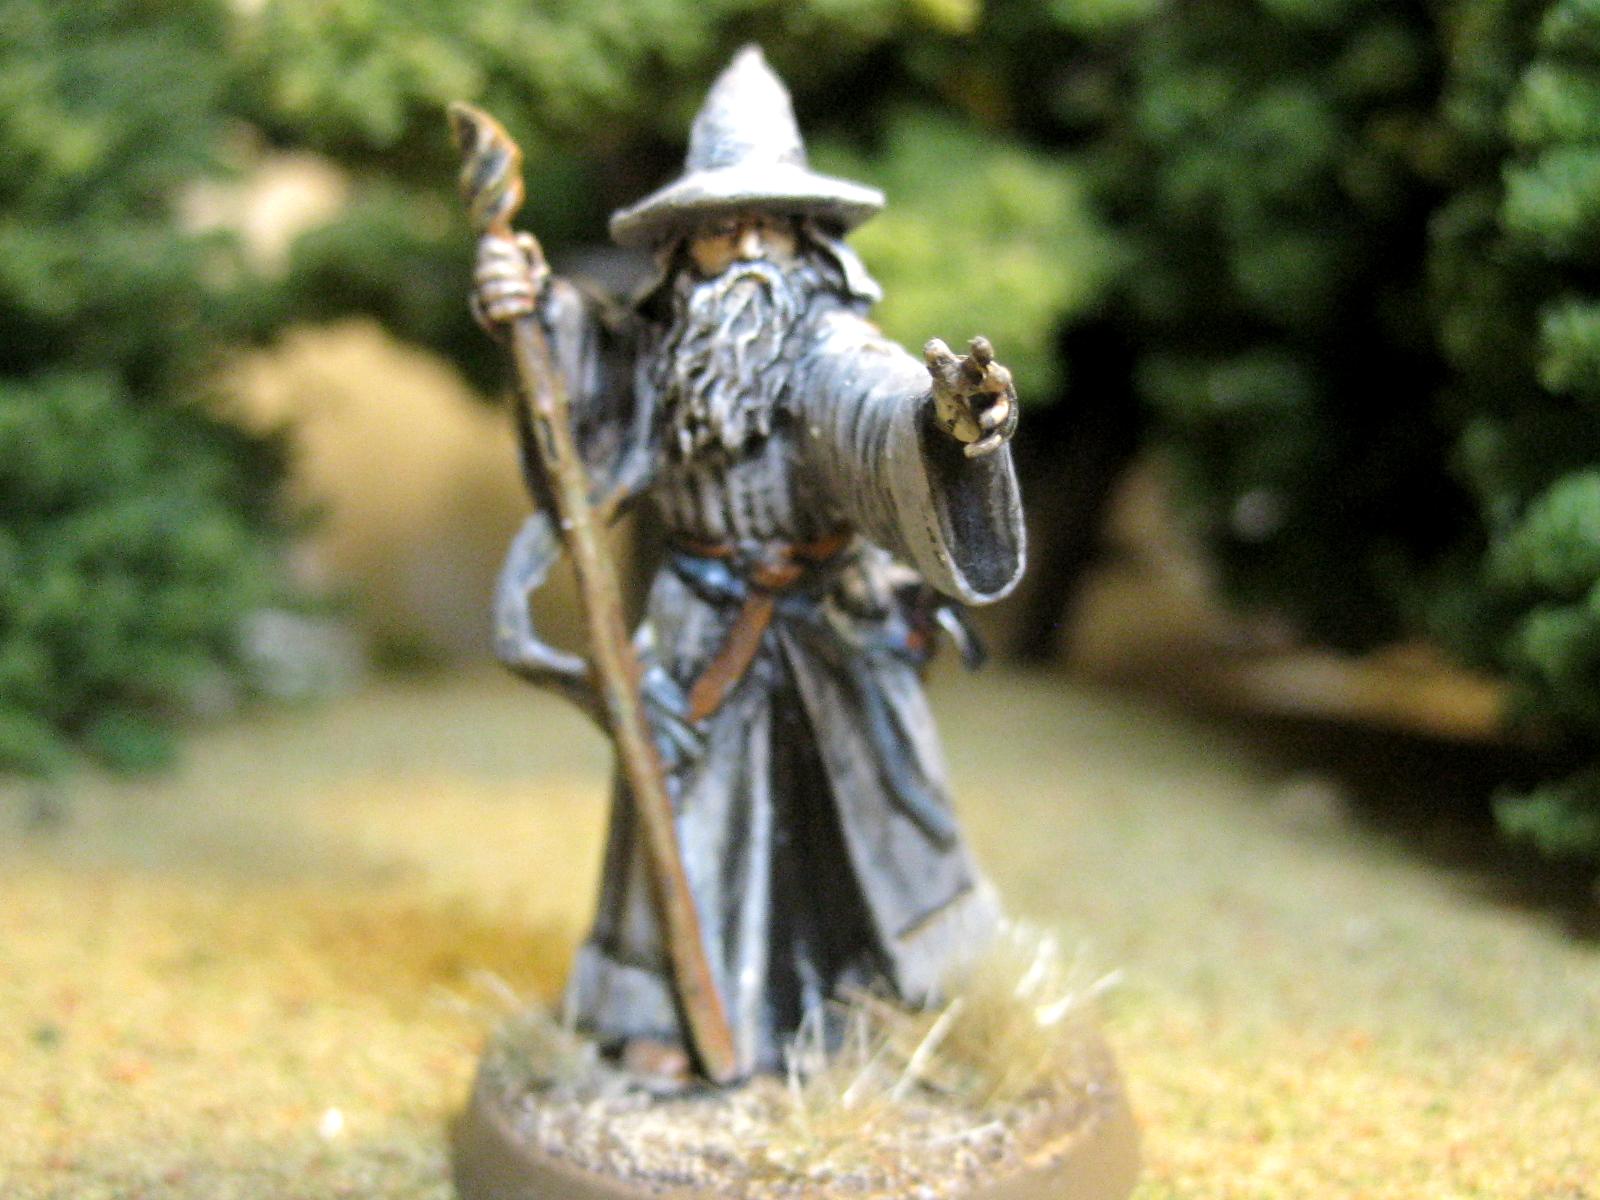 Gandalf The Grey, Grey, Hobbit, Lord Of The Rings